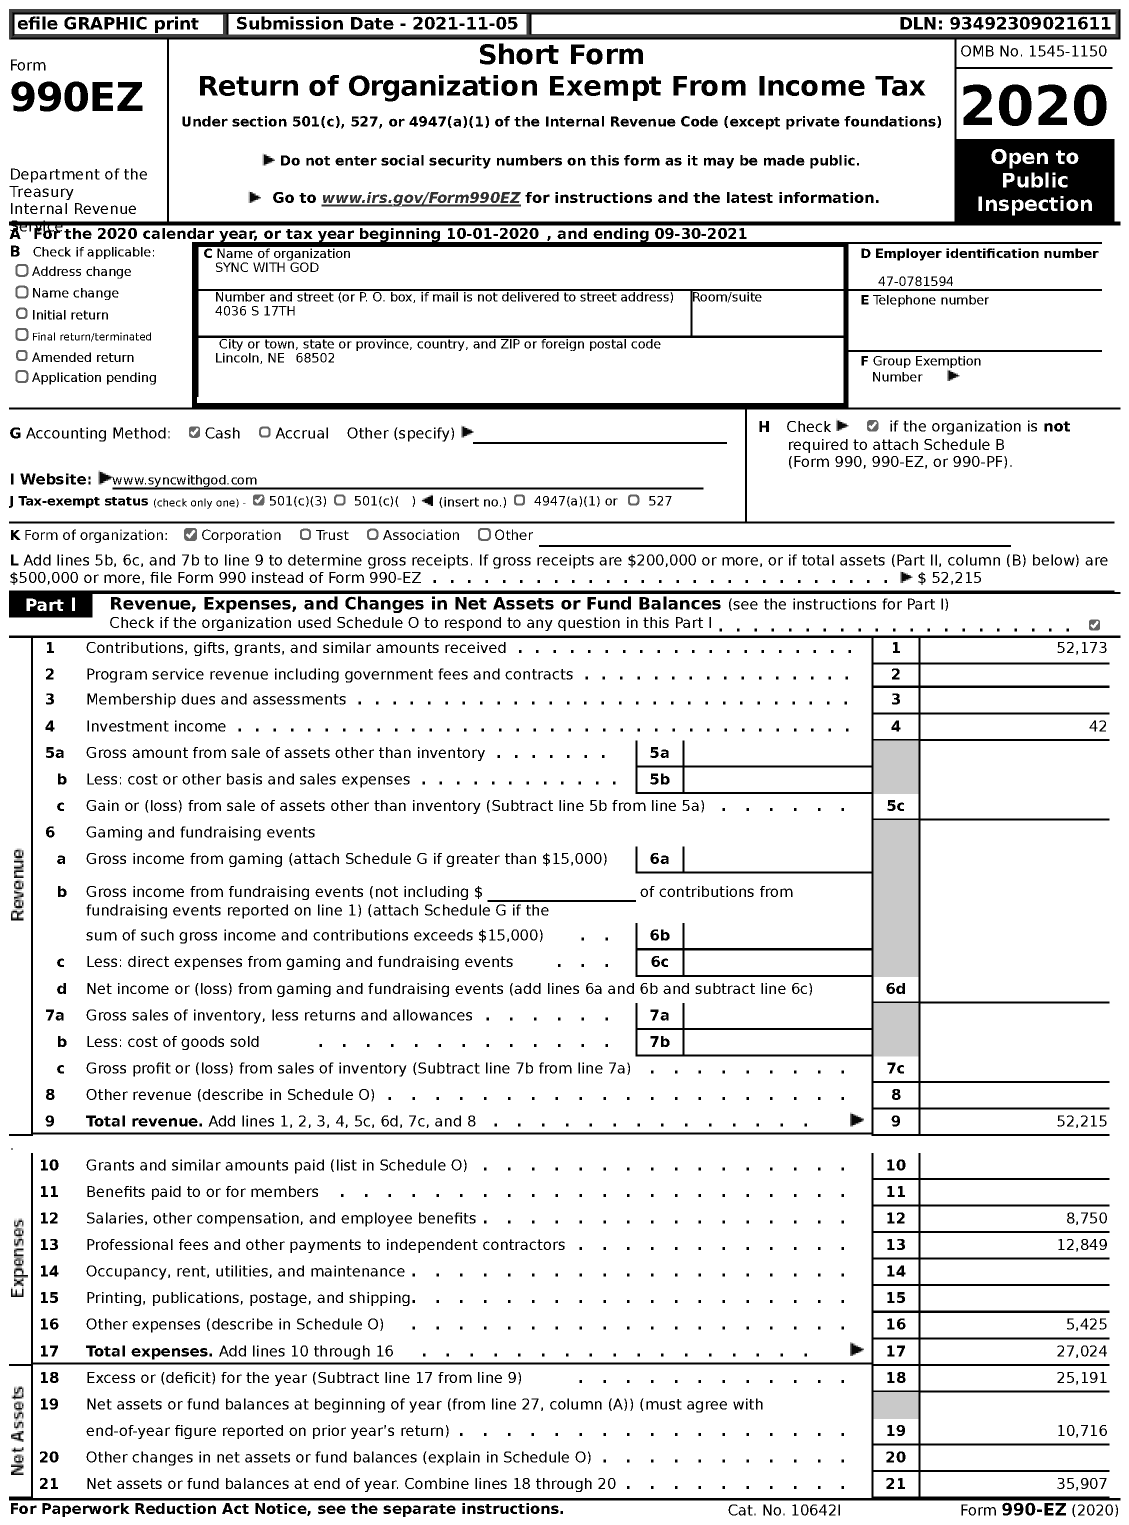 Image of first page of 2020 Form 990EZ for Sync with God